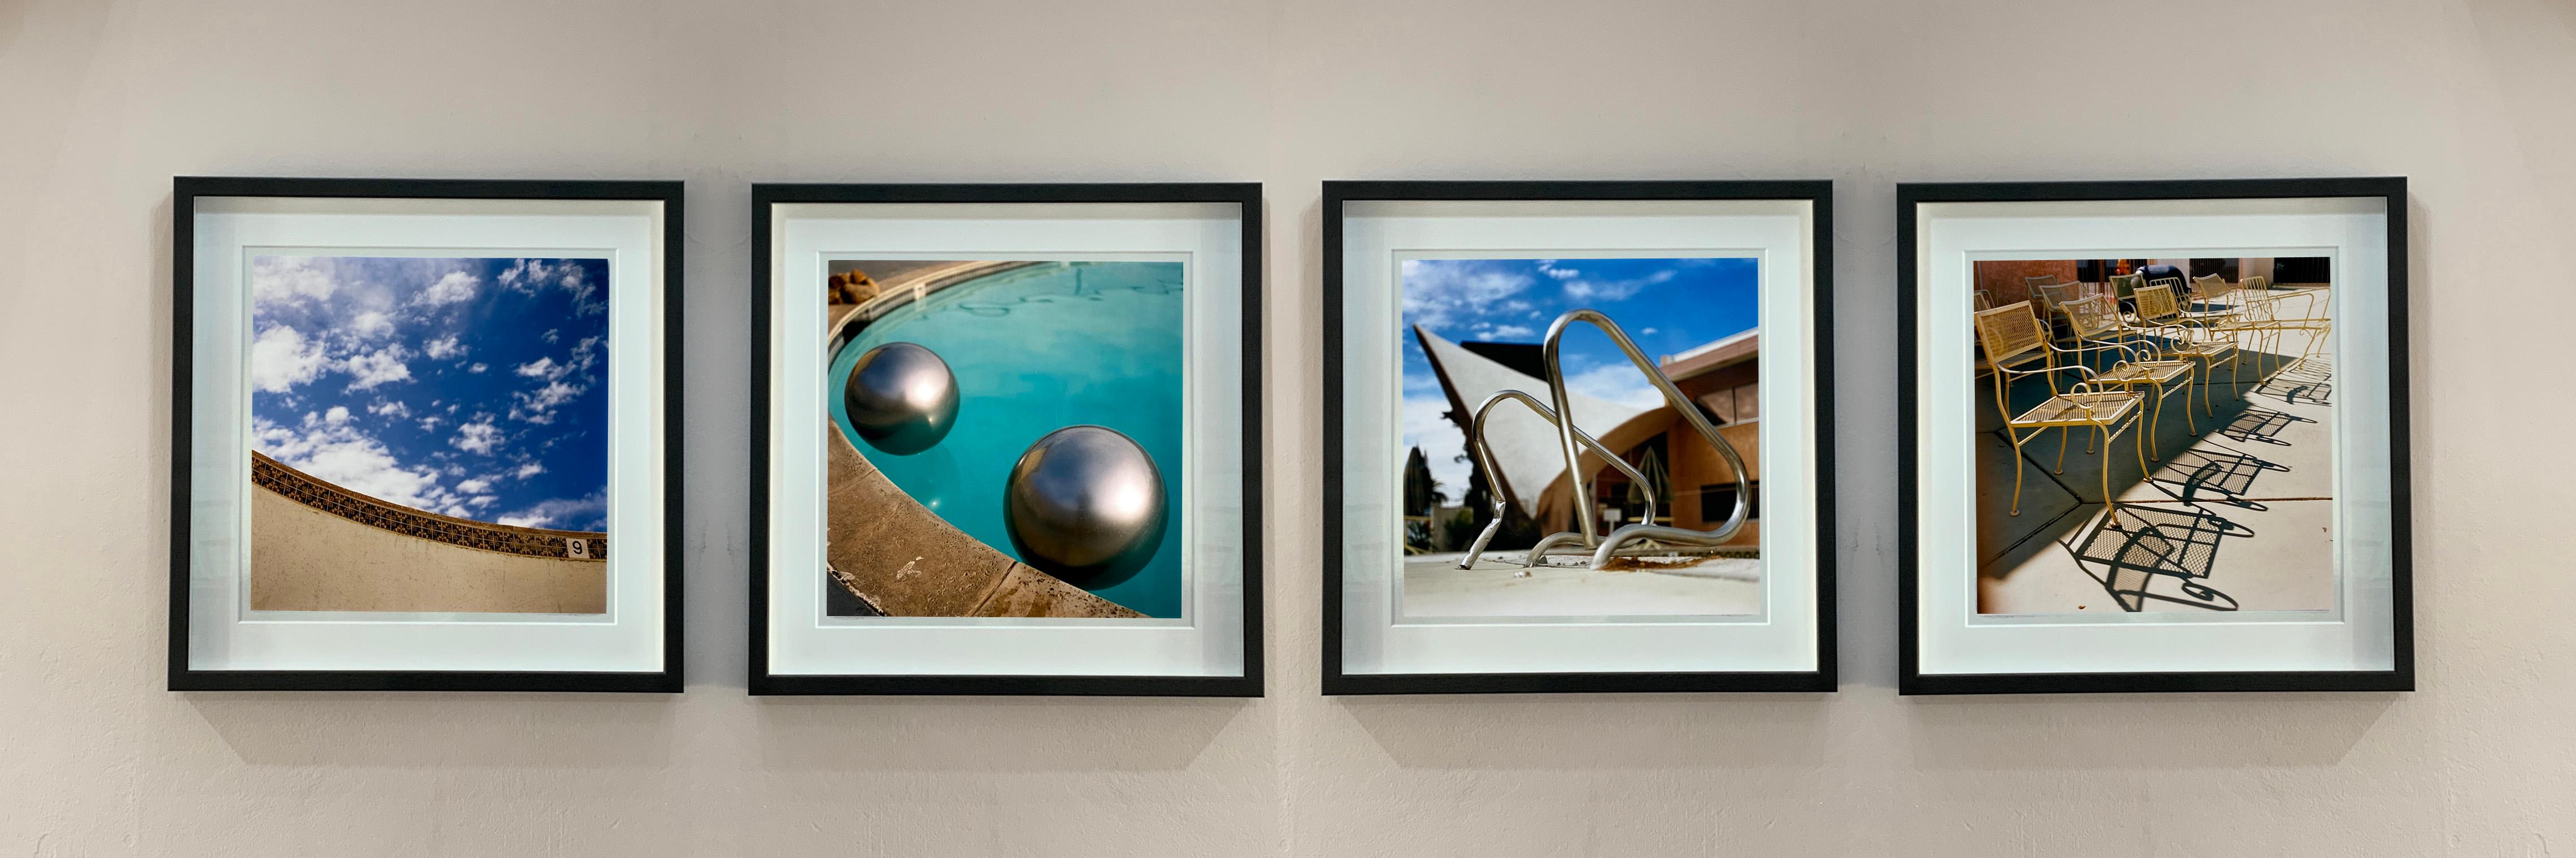 Pool Photography Set of Four Framed Artworks - American Color Photography For Sale 1